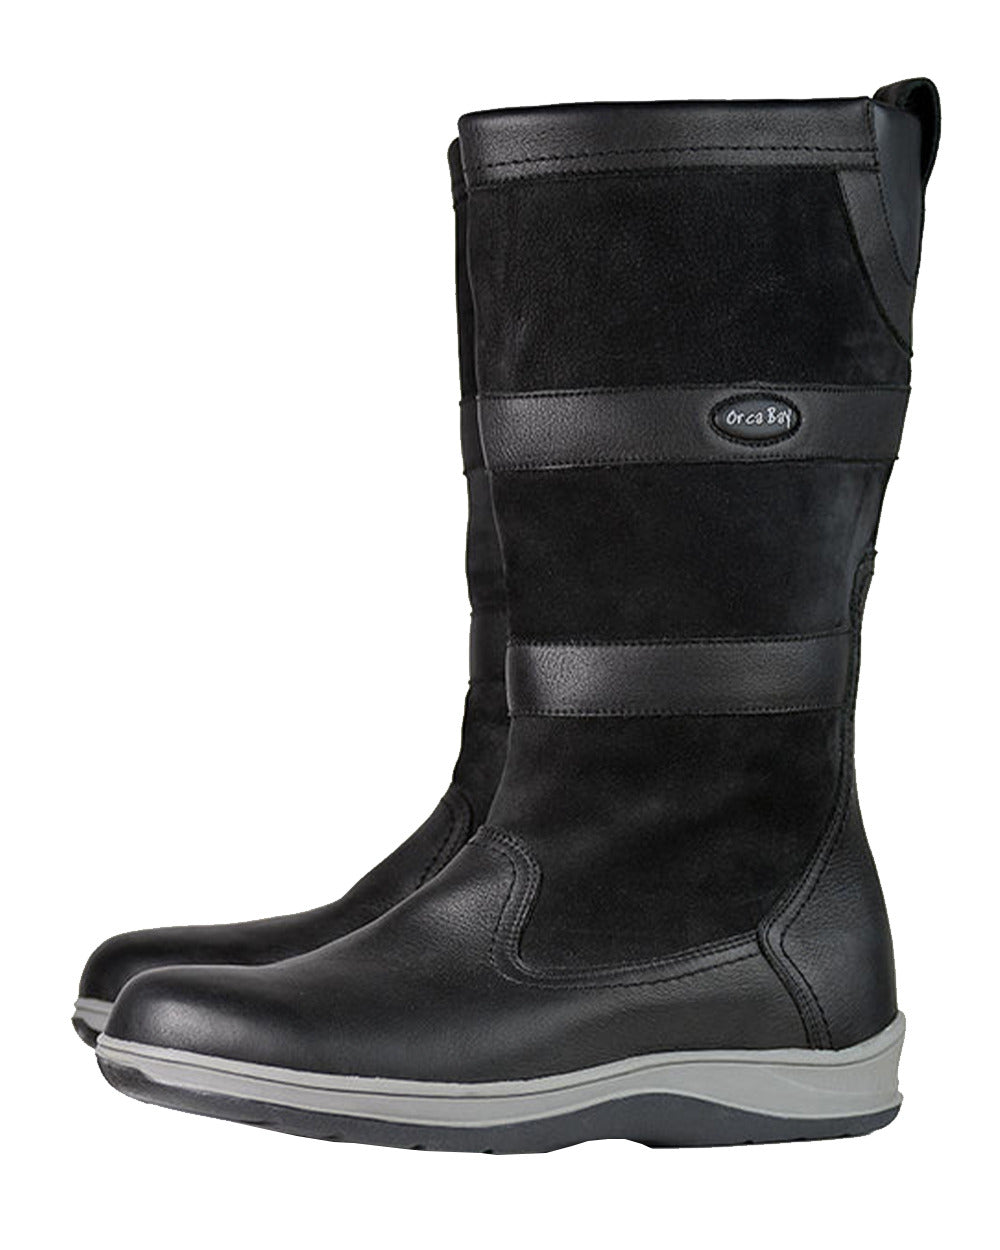 Carbon Coloured Orca Bay Storm Sailing Boots On A White Background 